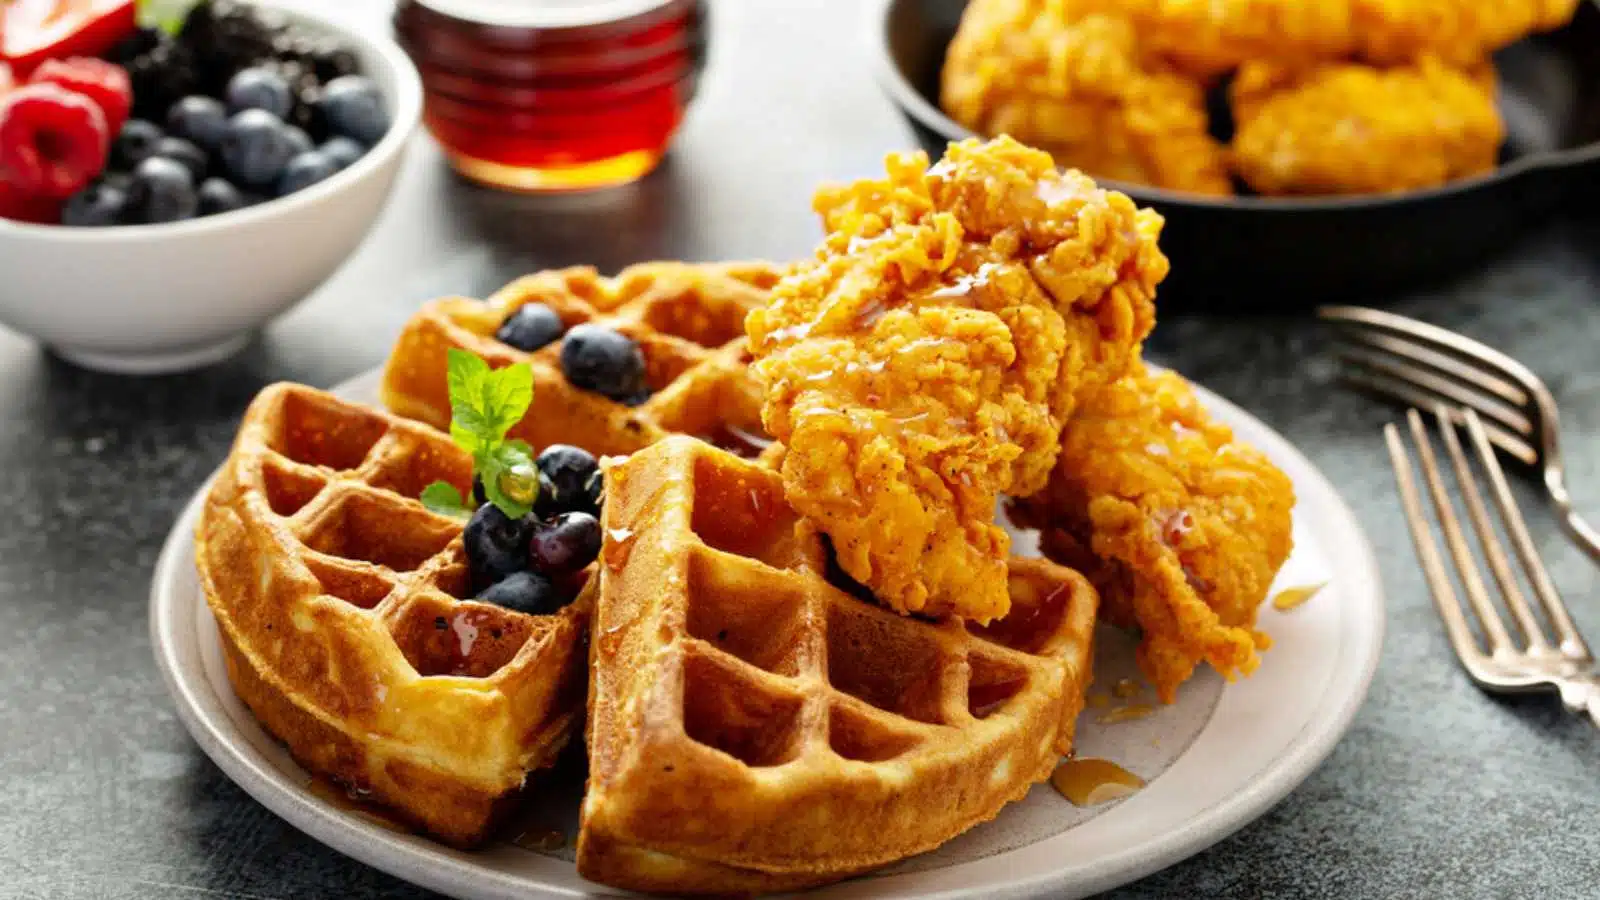 Waffles with fried chicken and maple syrup, southern comfort food